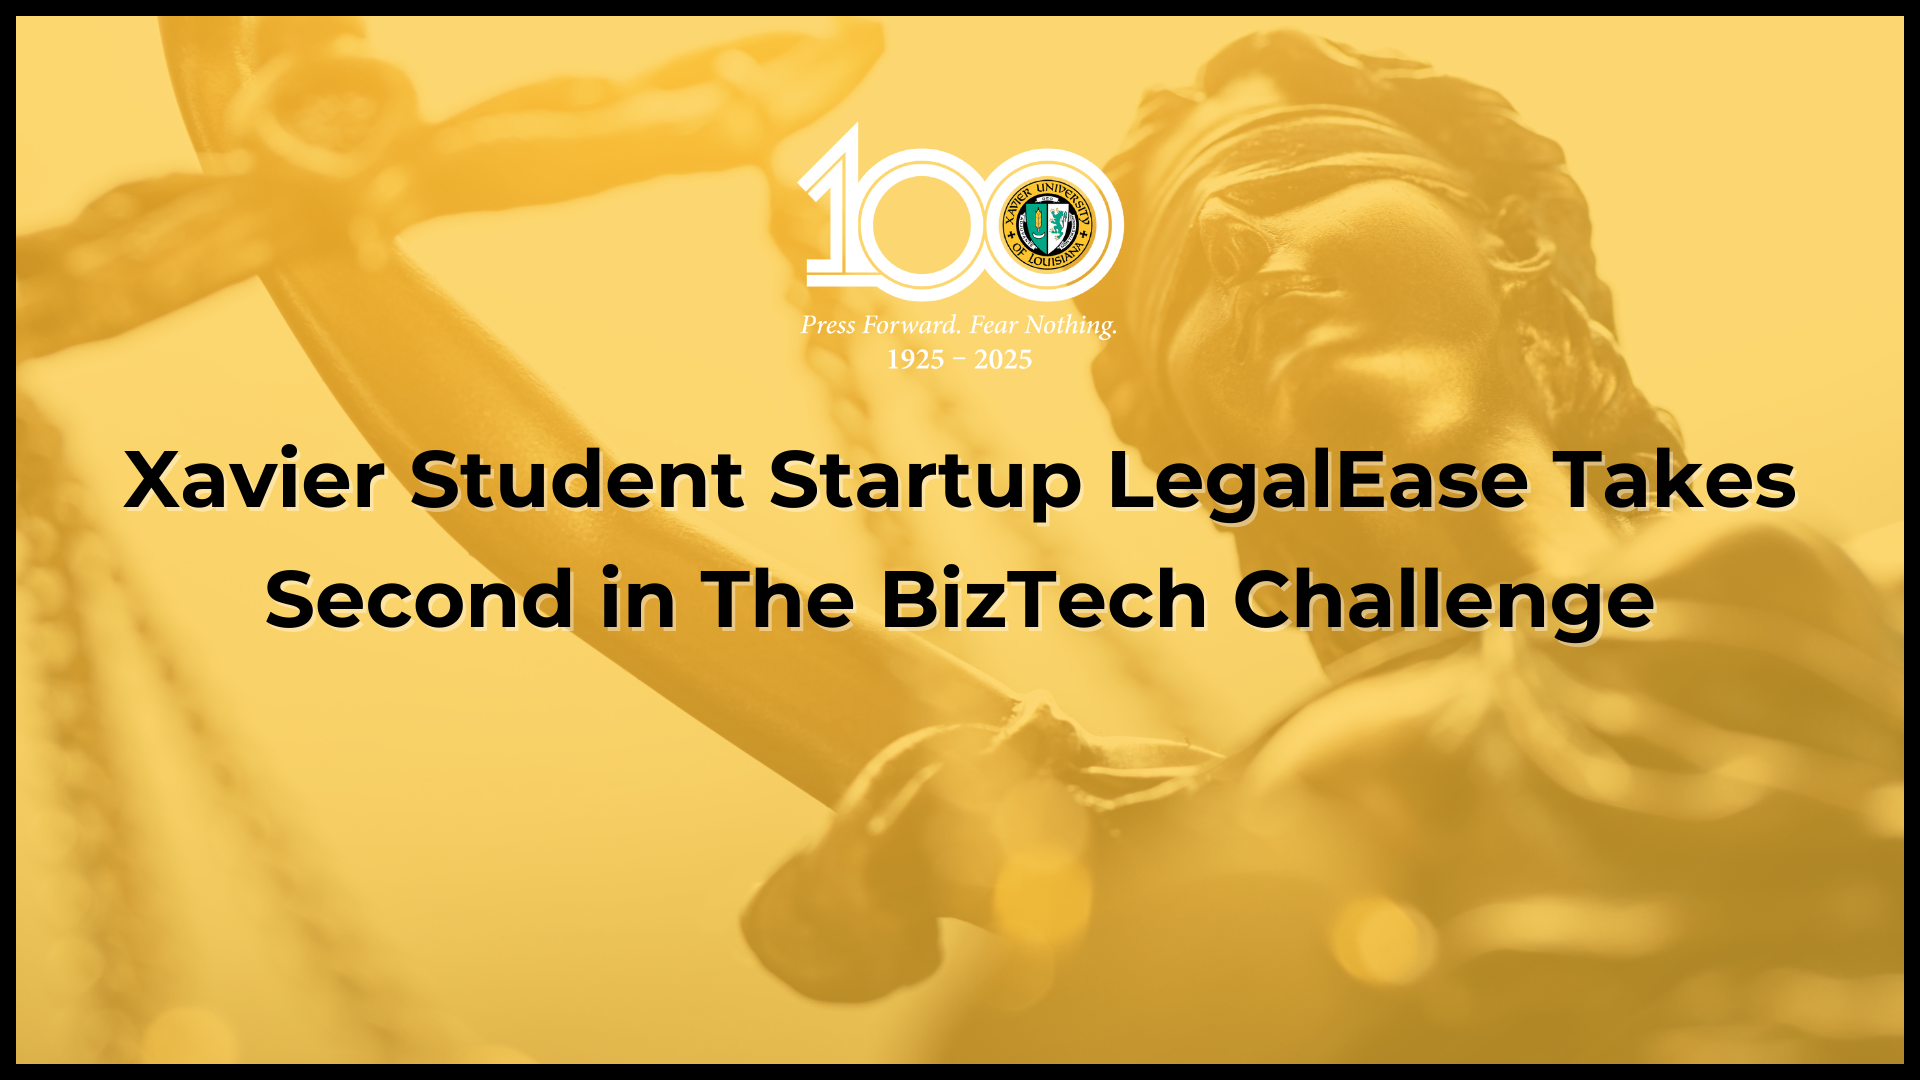 Xavier Student Startup LegalEase Takes Second in The BizTech Challenge